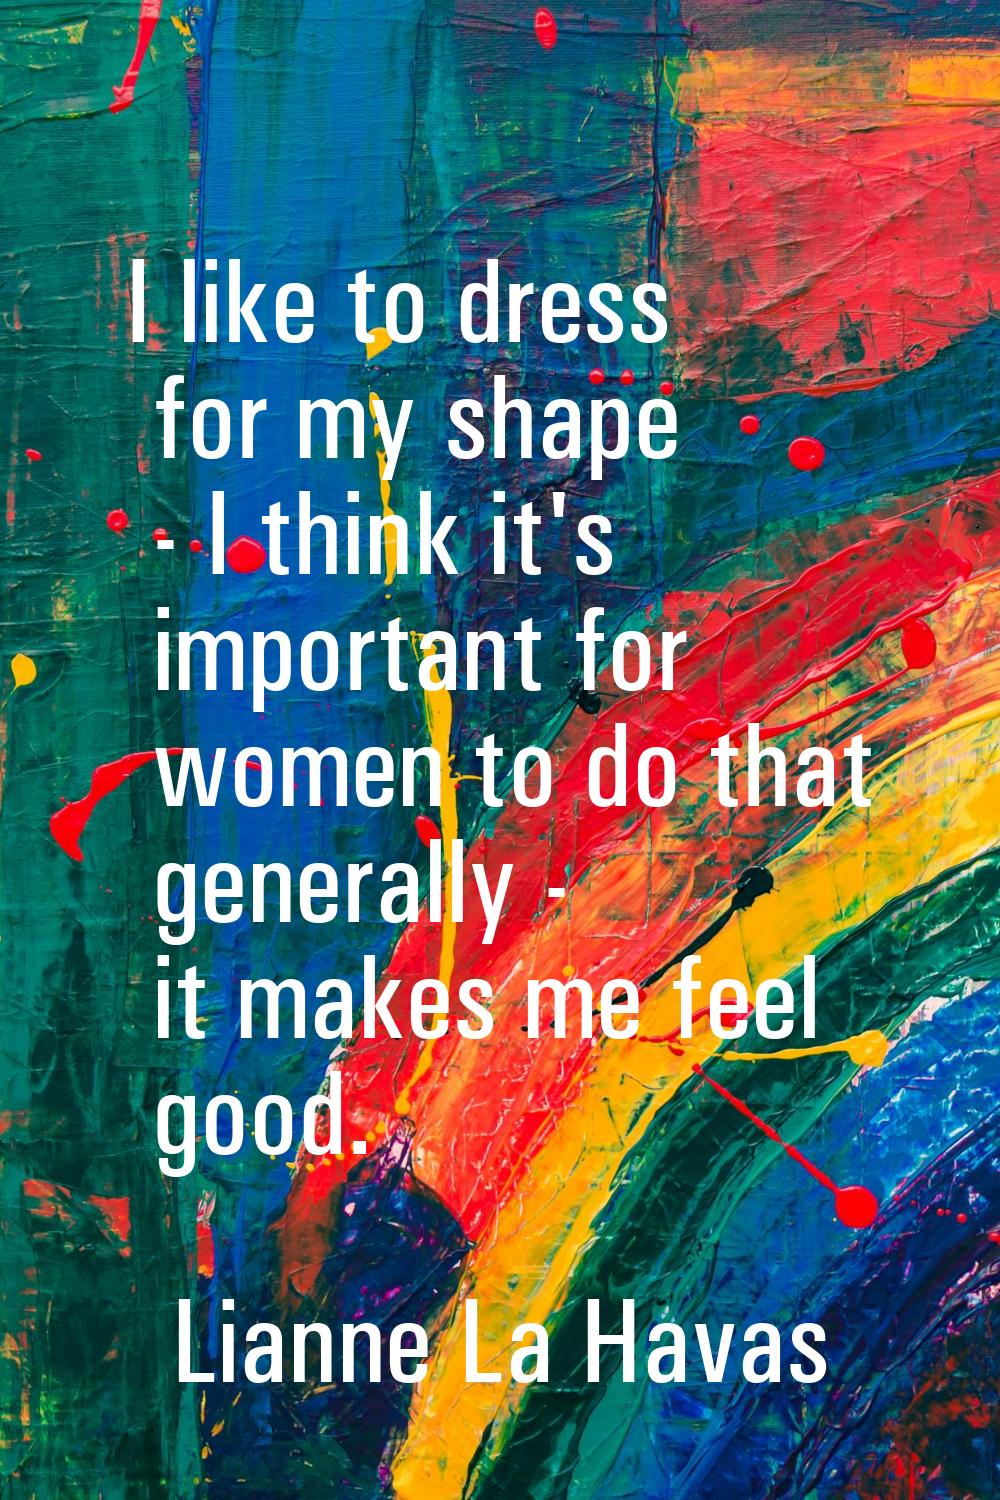 I like to dress for my shape - I think it's important for women to do that generally - it makes me 